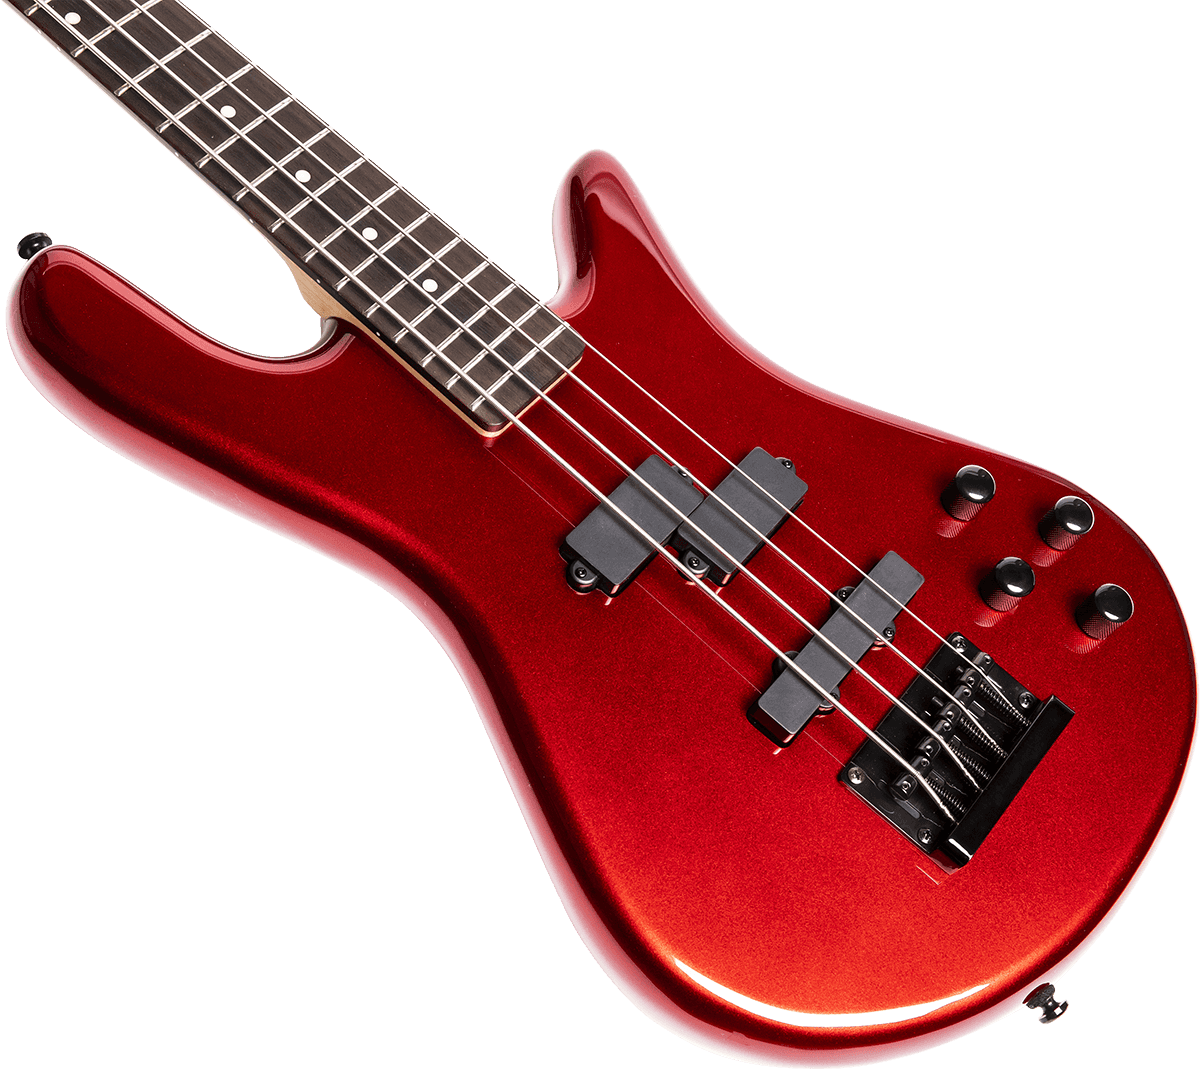 Spector Performer Serie 4 Eb - Metallic Red - Basse Électrique Solid Body - Variation 2